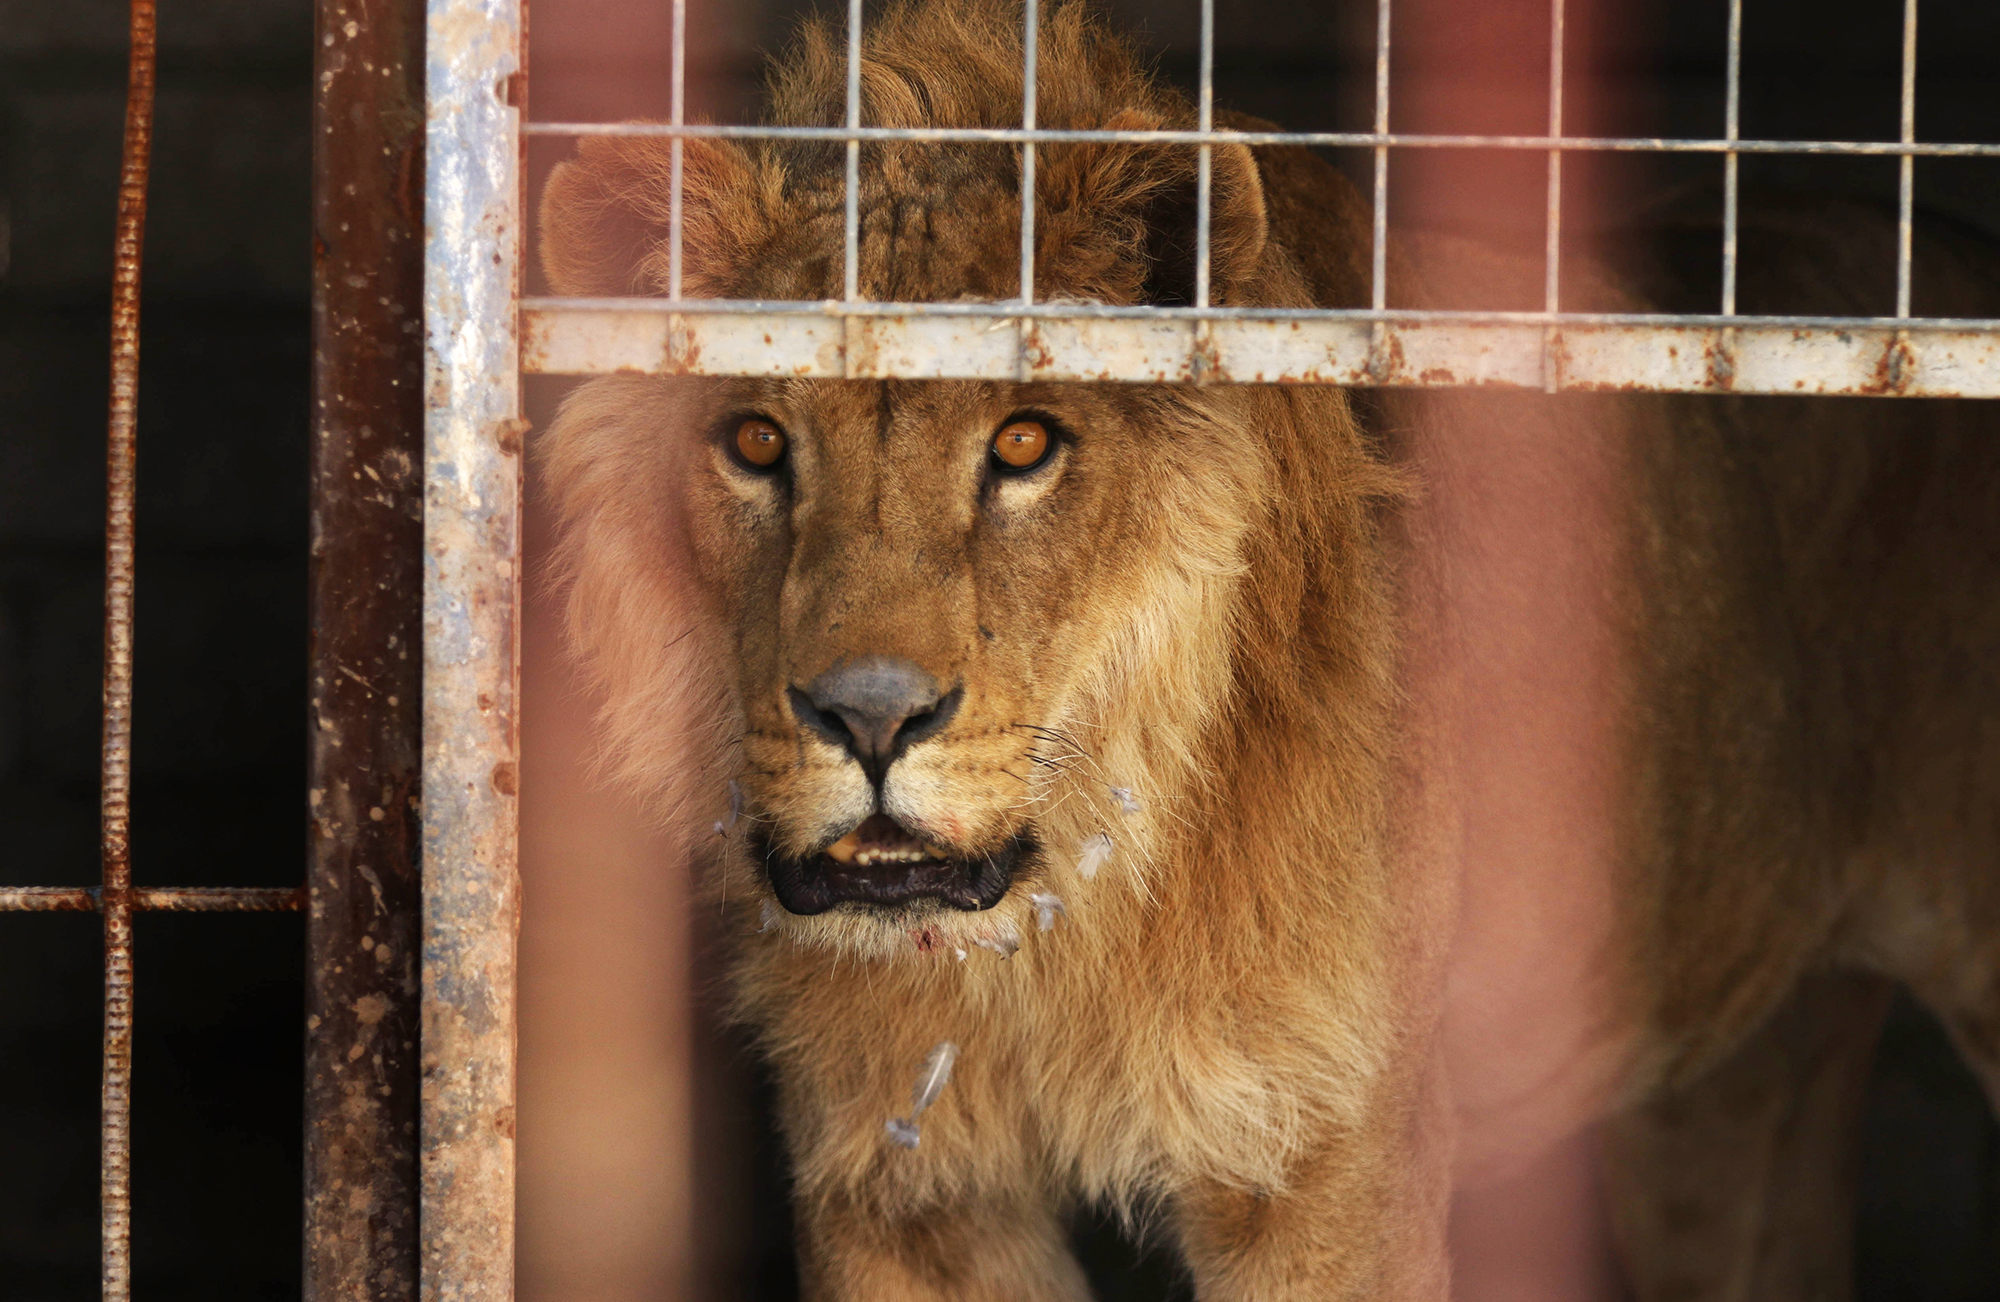 An abandoned lion, Simba, stands in its cage before receiving treatment from members of the international animal welfare charity "Four Paws" at the Muntazah al-Nour zoo in eastern Mosul, on Feb. 21, 2017. (Safin Hamed—AFP/Getty Images)